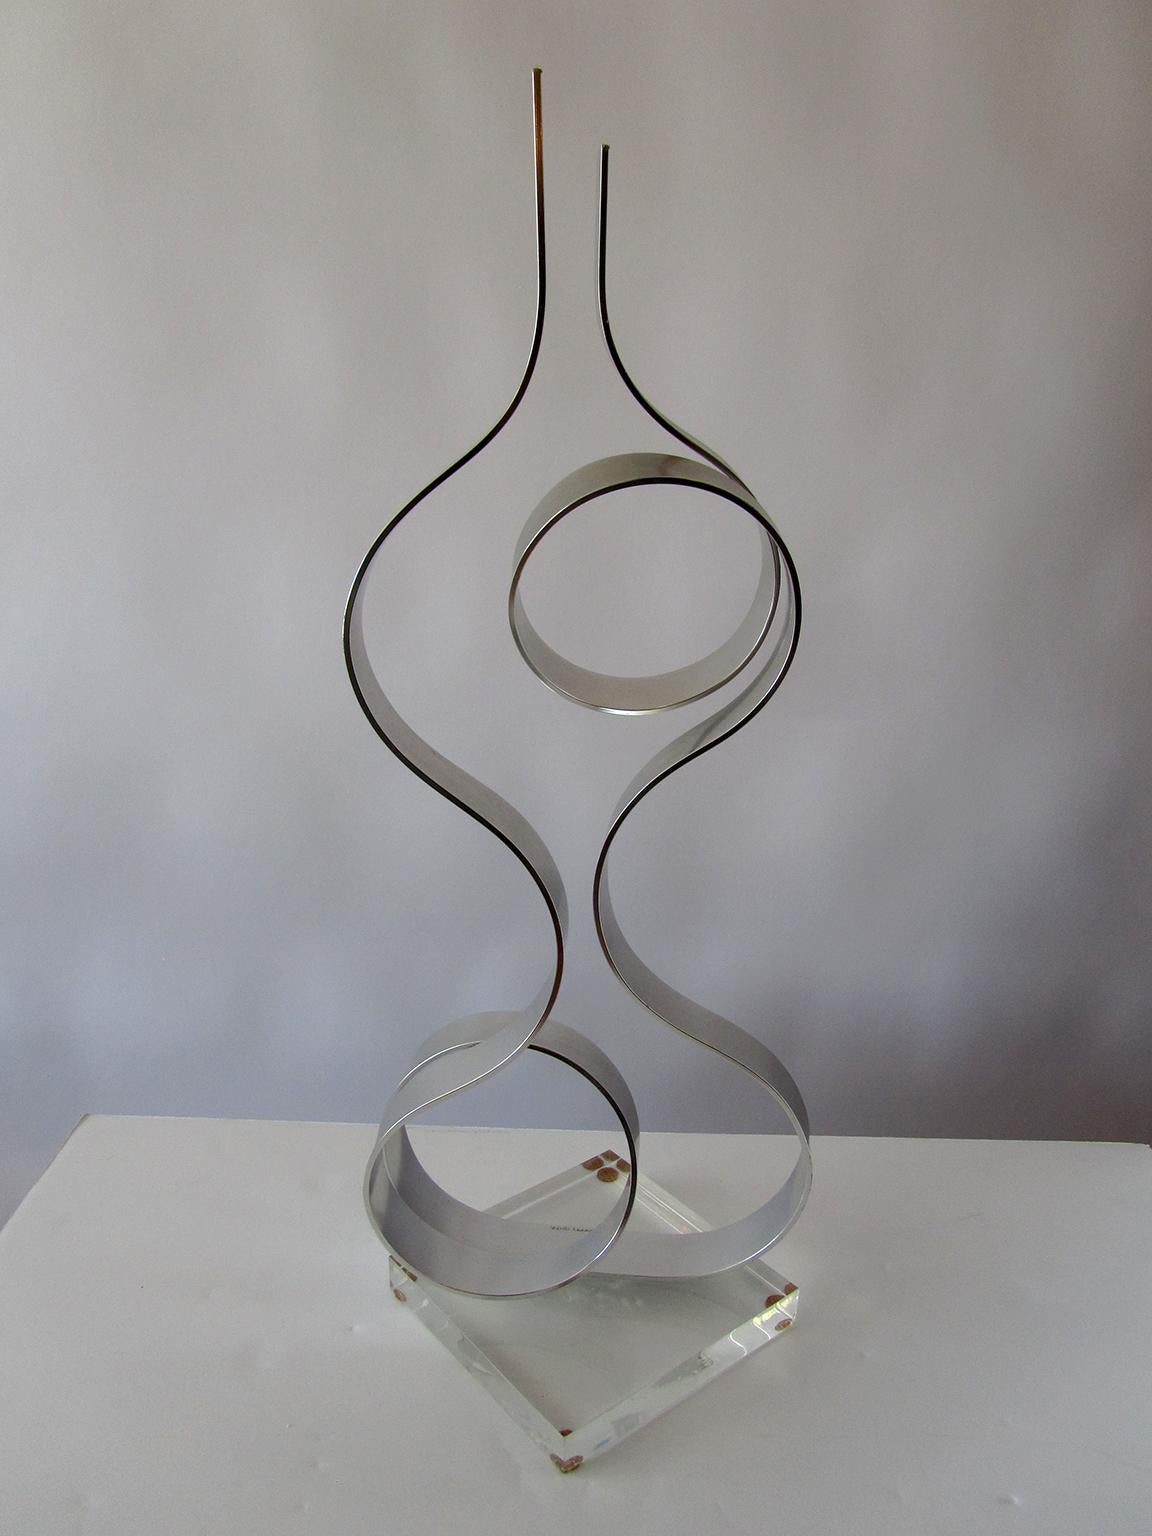 Late 20th Century American Modern Abstract Expressionist Polished Steel Sculpture, Dan Murphy For Sale